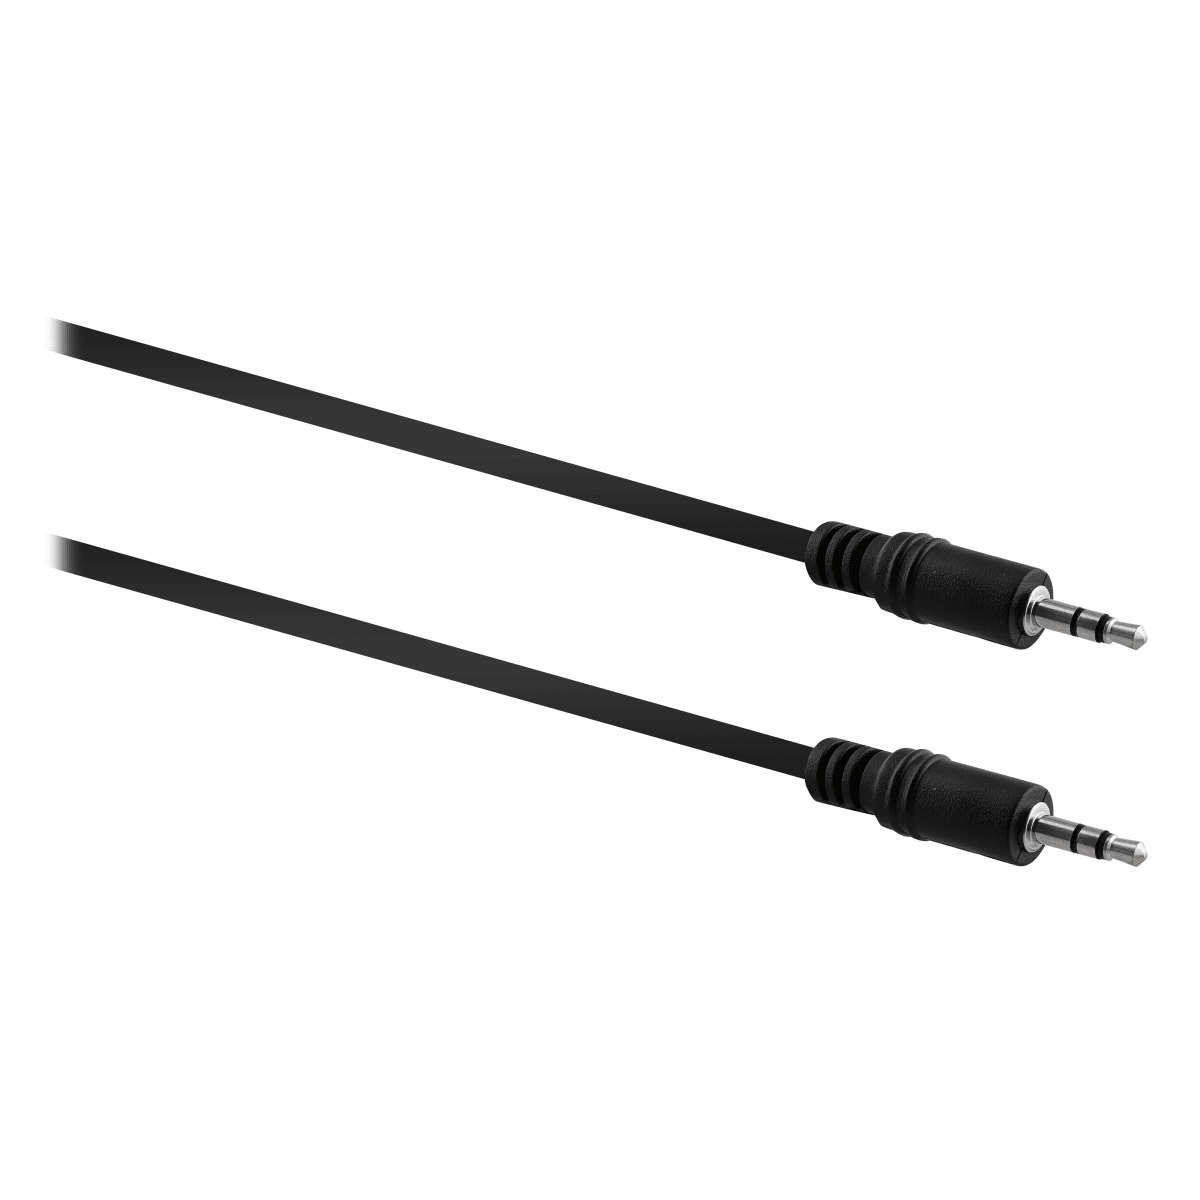 Jack 3,5mm male / jack 3,5mm male cable 3m